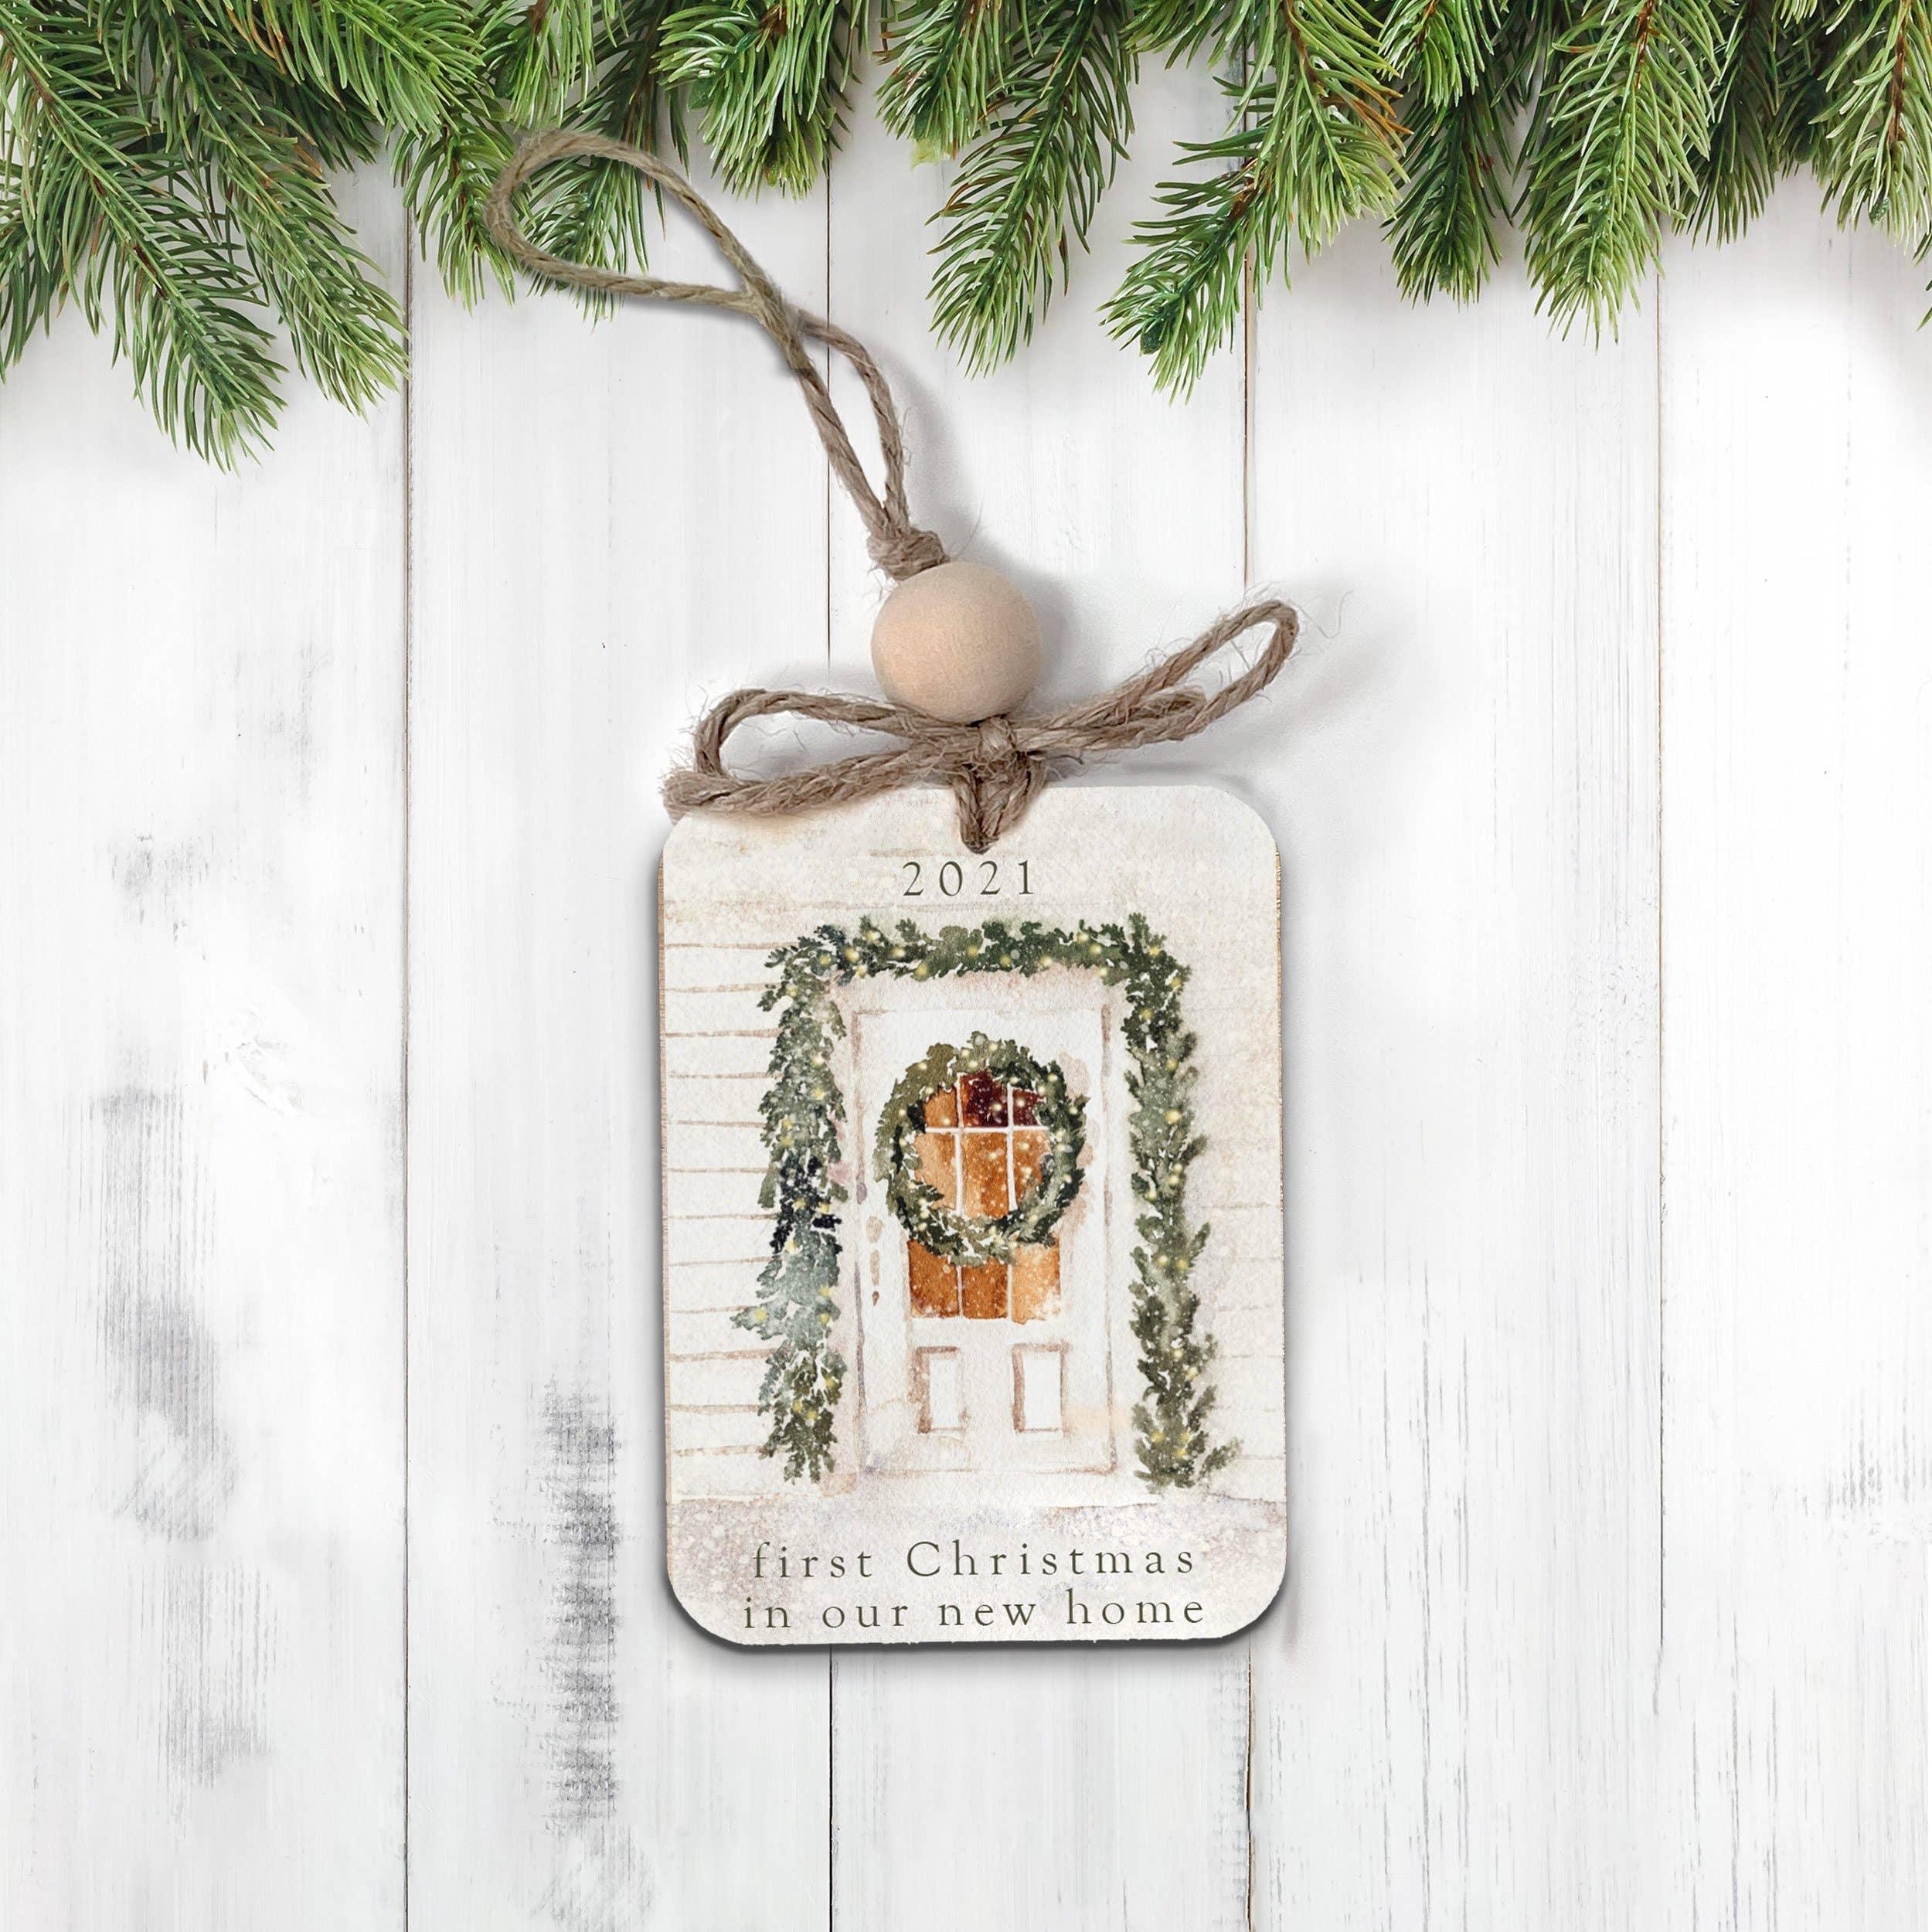 First Christmas in our new home rustic wood Christmas ornament front door - Signastyle Boutique